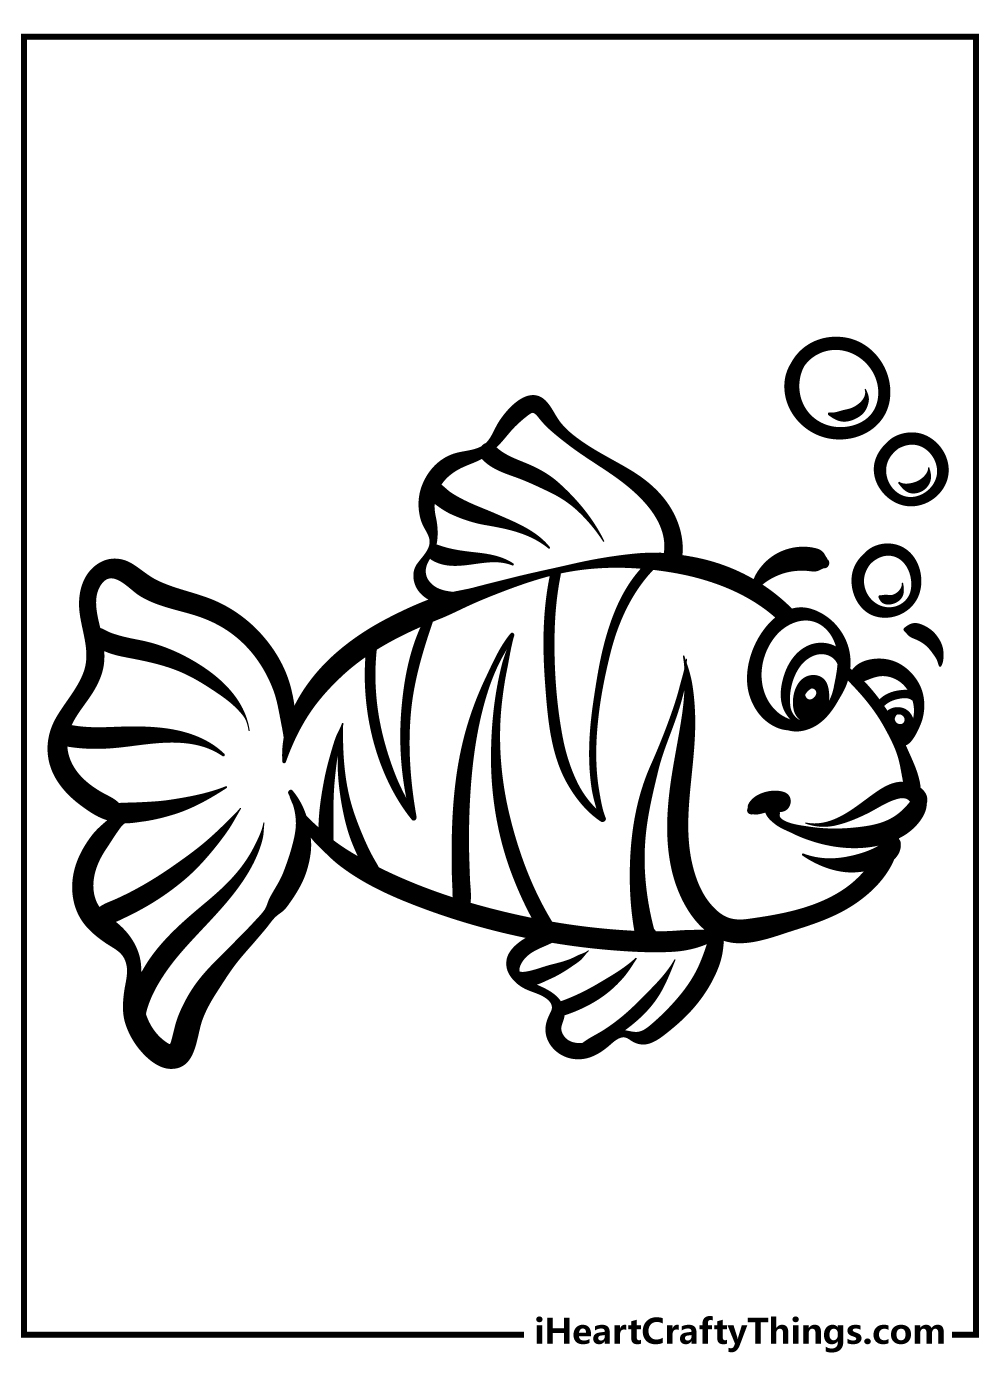 fish coloring pages free printable